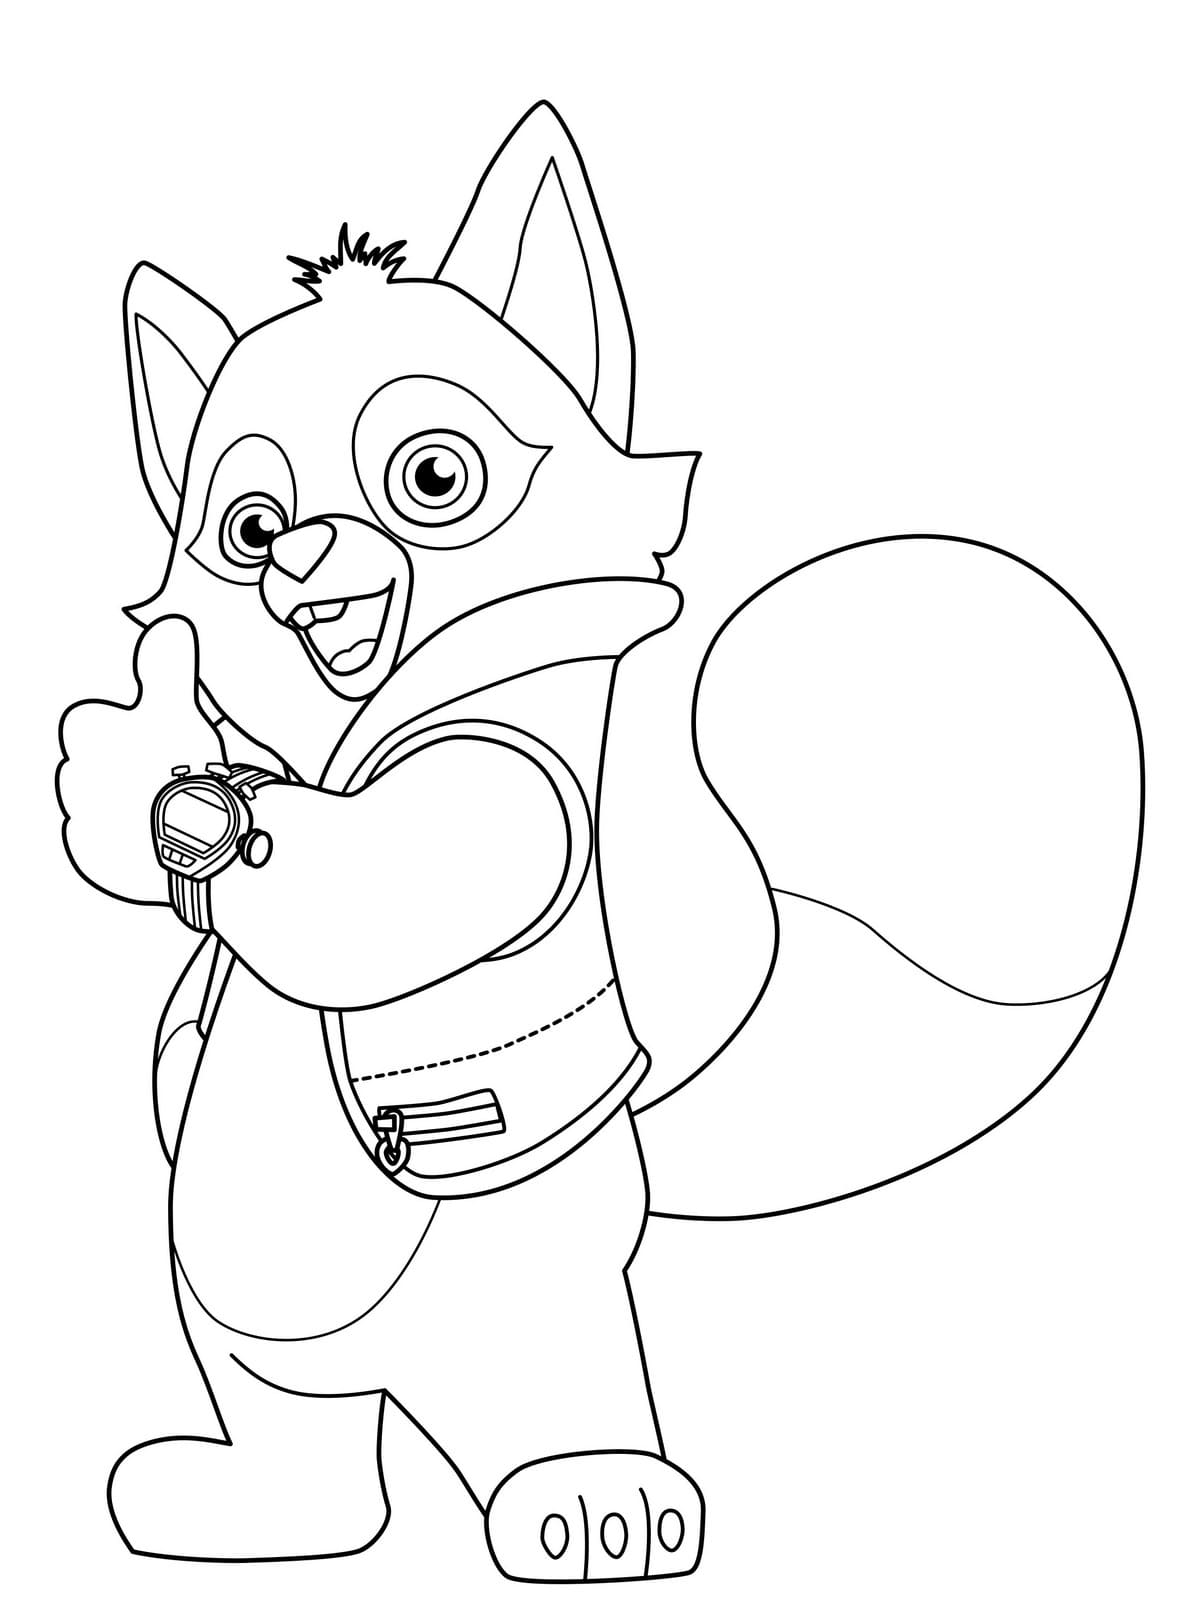 Special Agent Oso Coloring Page - Coloring Home